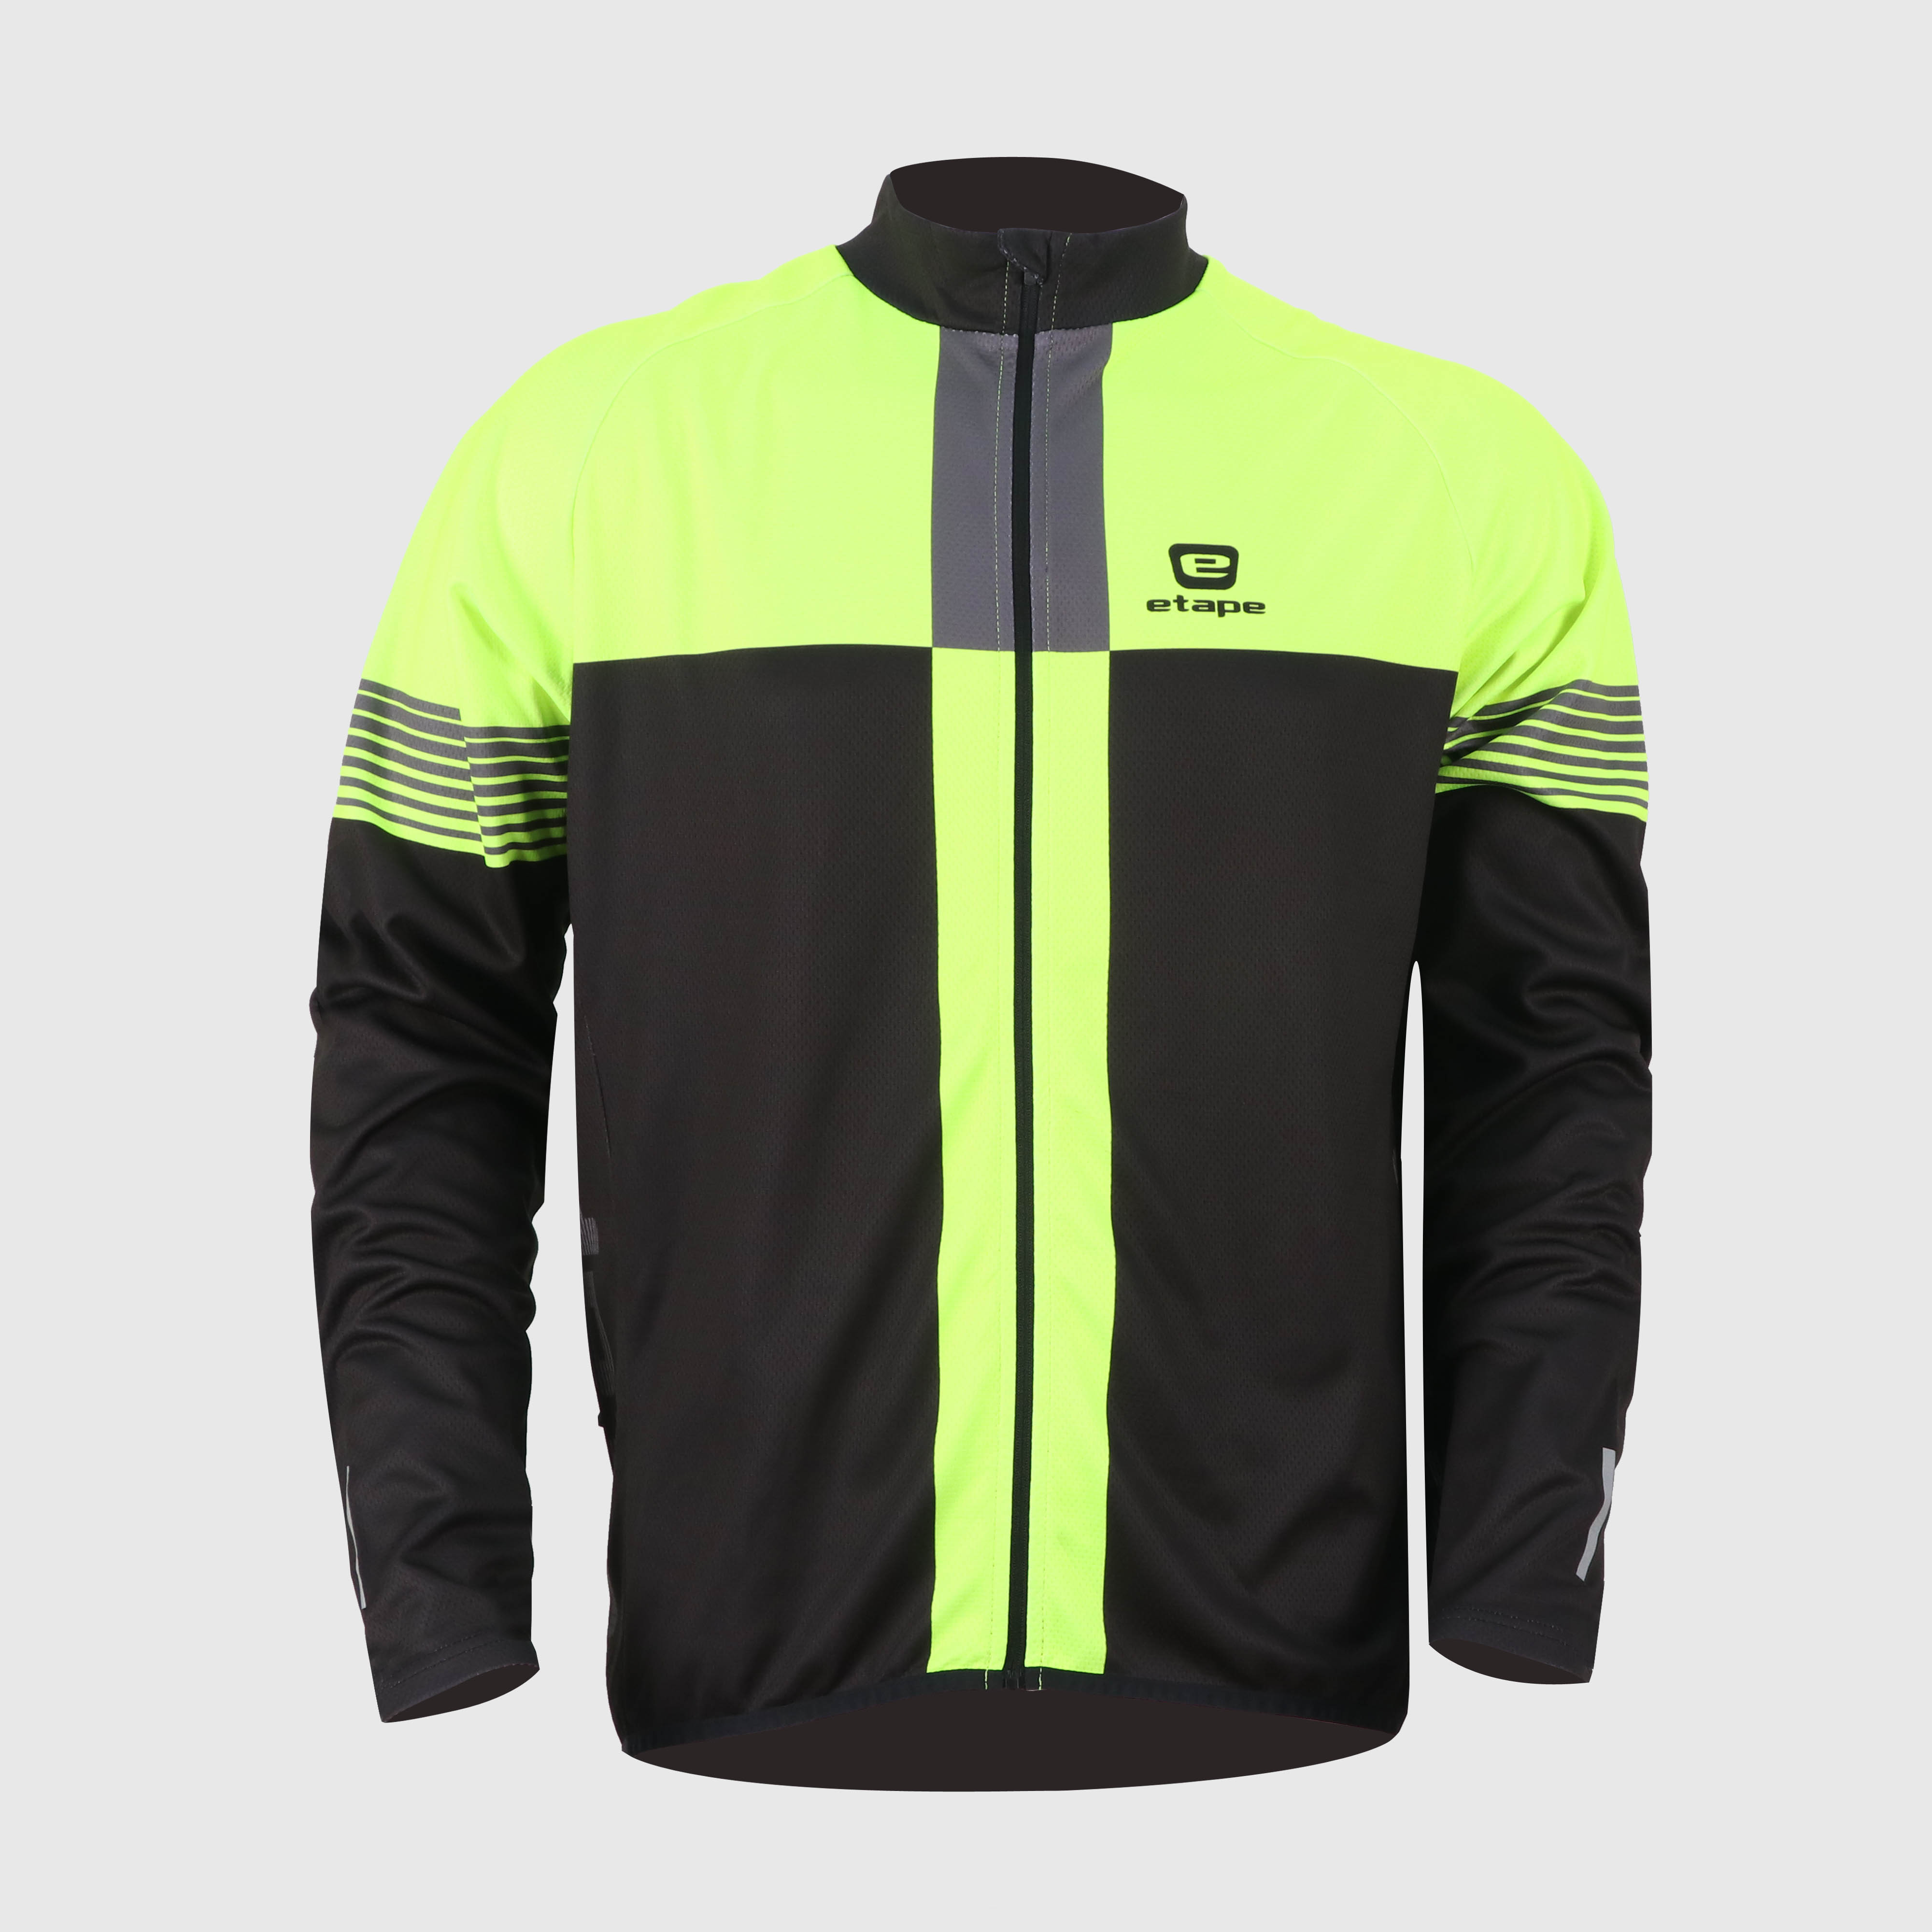 Men’s Cycling Bike Jersey Long Sleeve with 2 Rear Pockets- Moisture Wicking, Breathable, Quick Dry Biking Shirt